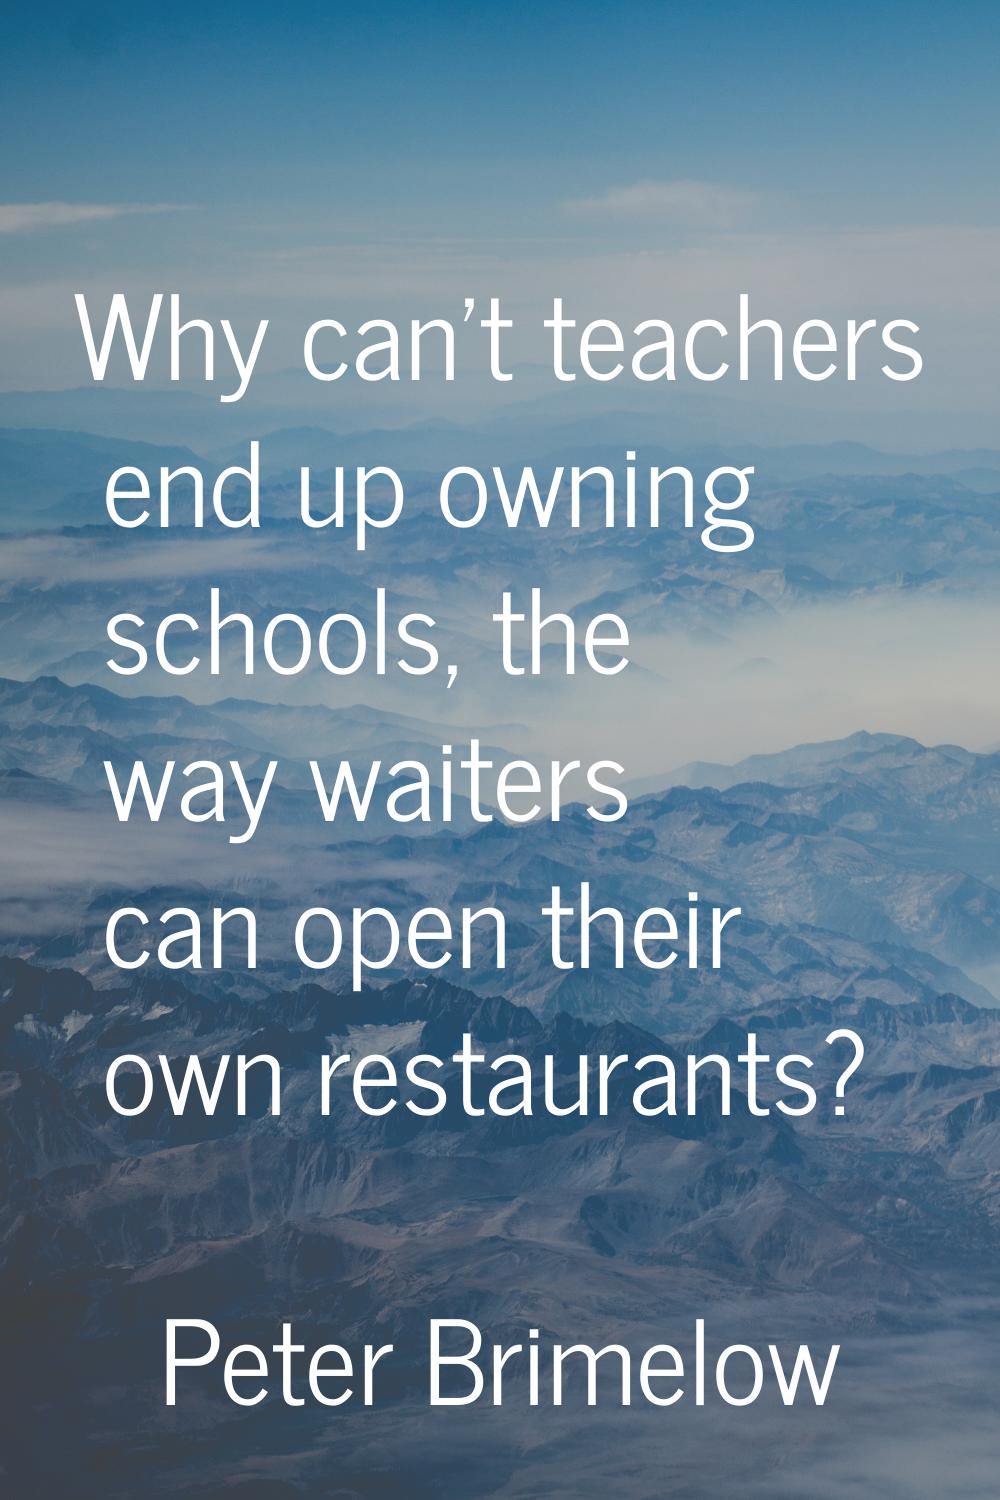 Why can't teachers end up owning schools, the way waiters can open their own restaurants?